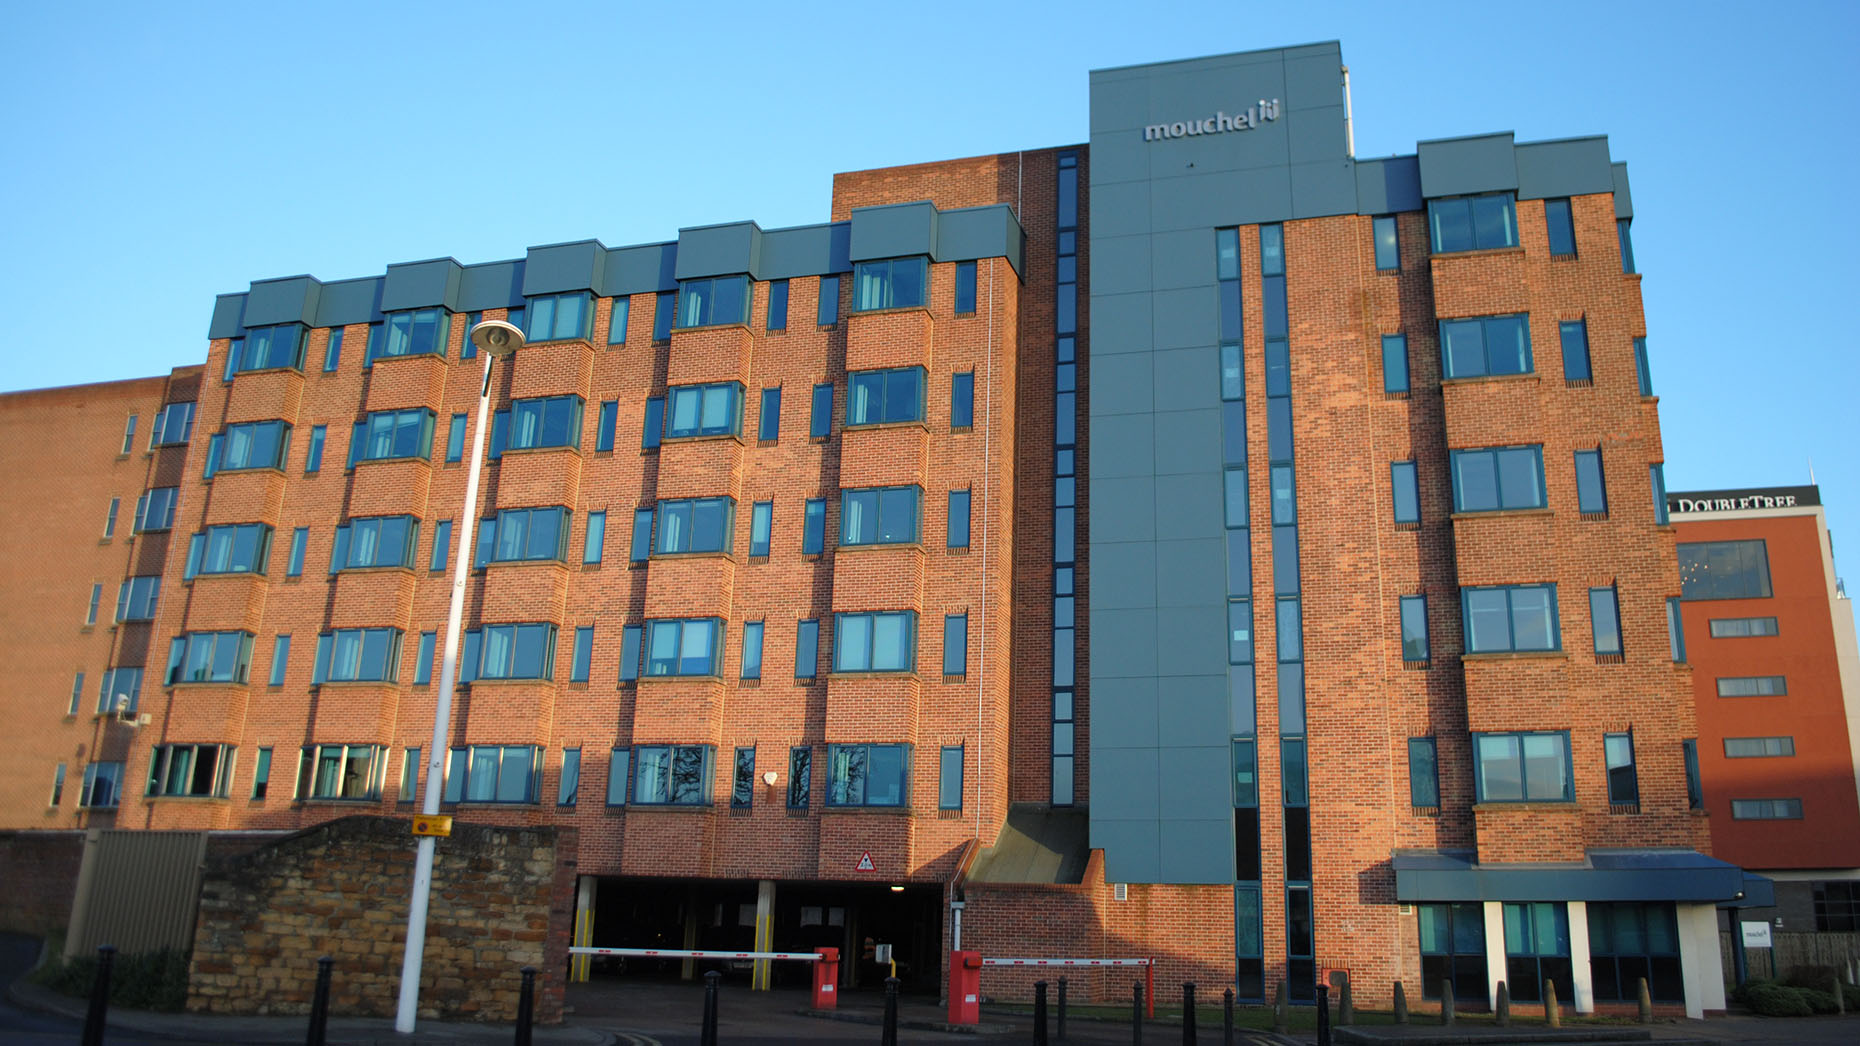 The Mouchel offices in Lincoln